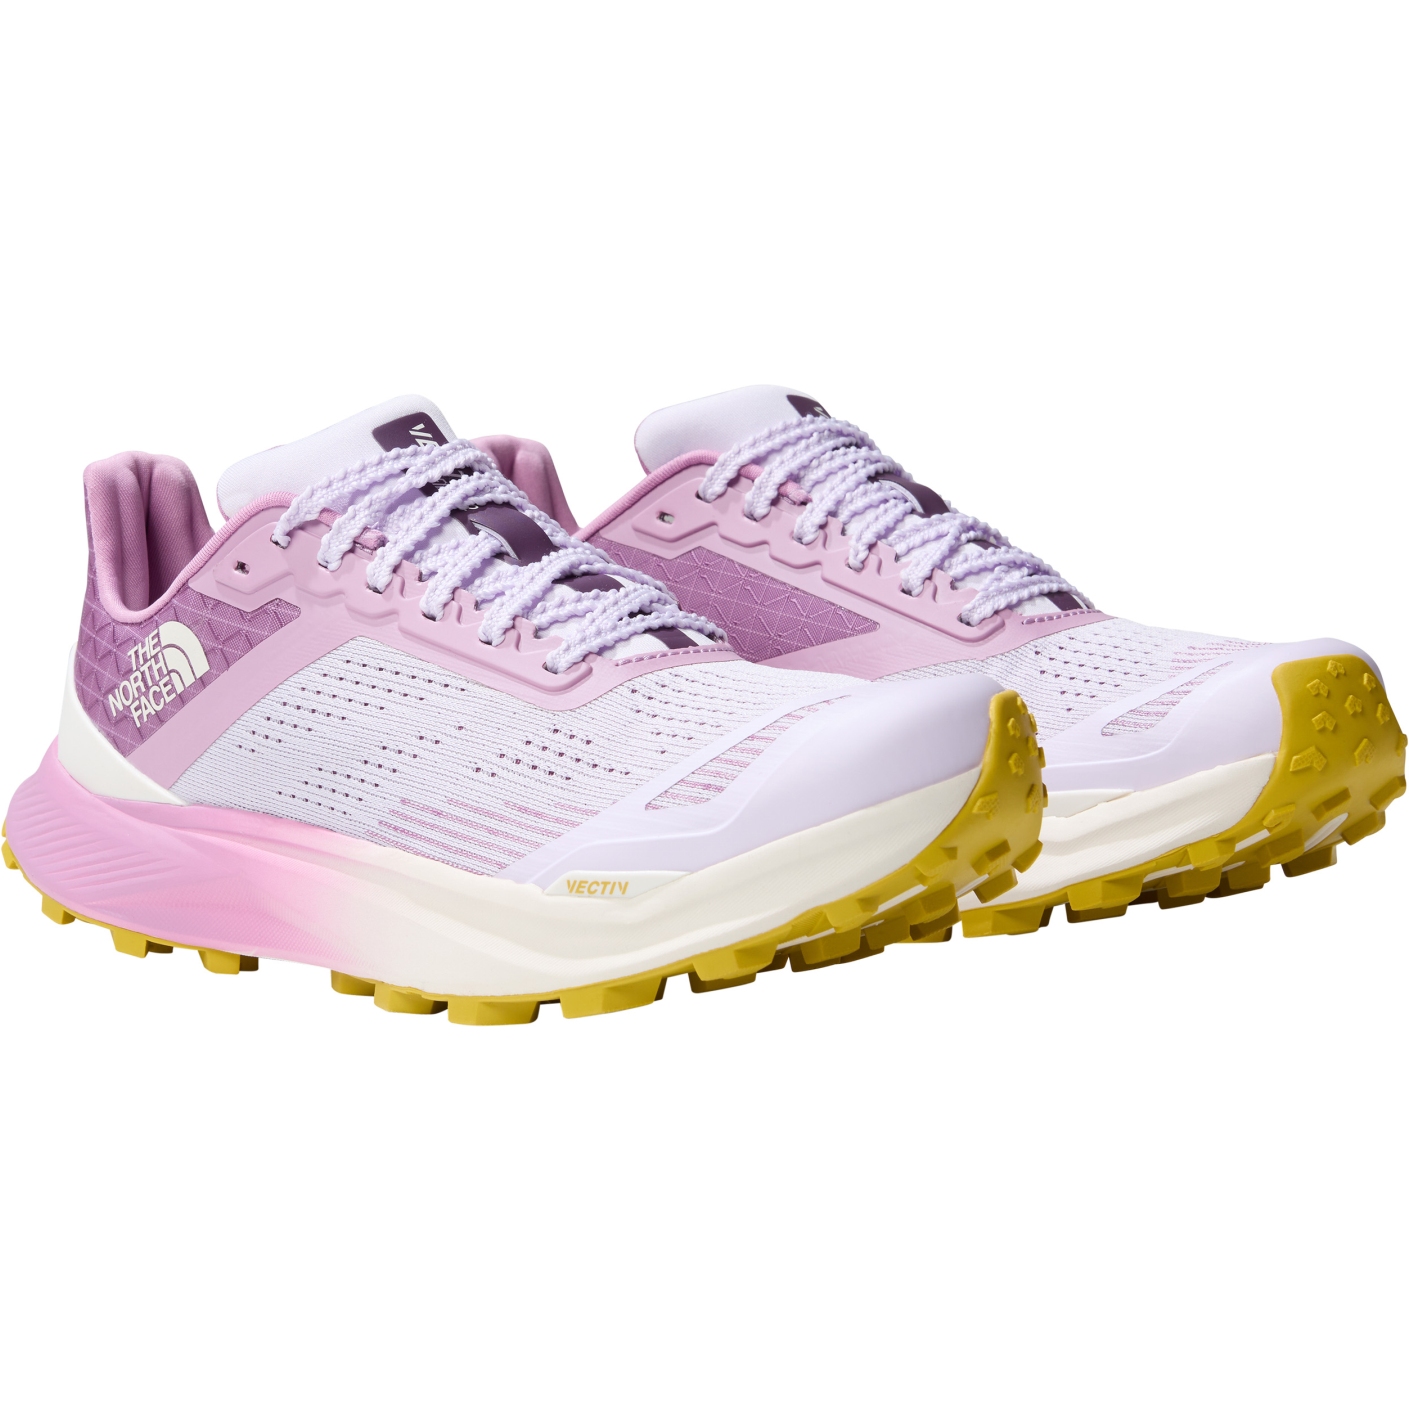 Picture of The North Face VECTIV™ Infinite II Trail Running Shoes Women - Icy Lilac/Mineral Purple